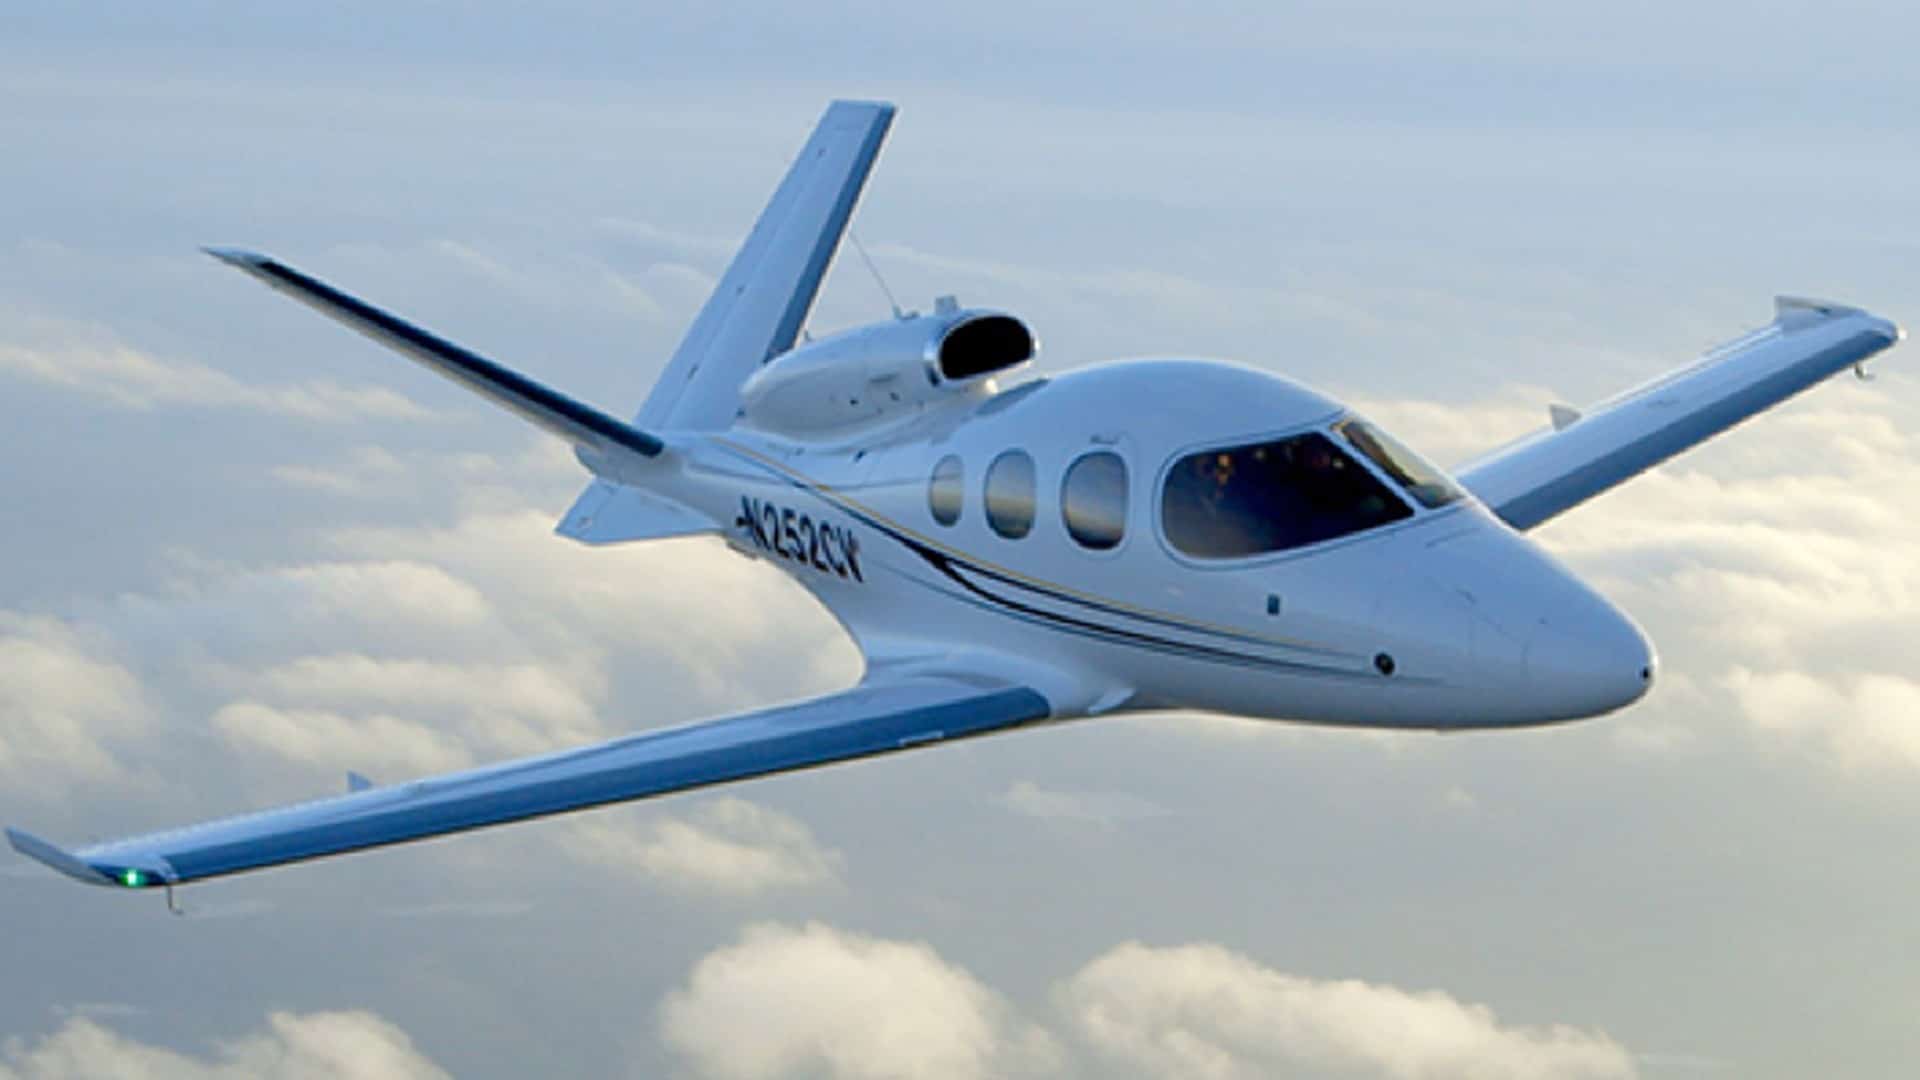 The Vision Jet Achieves FAA Certification